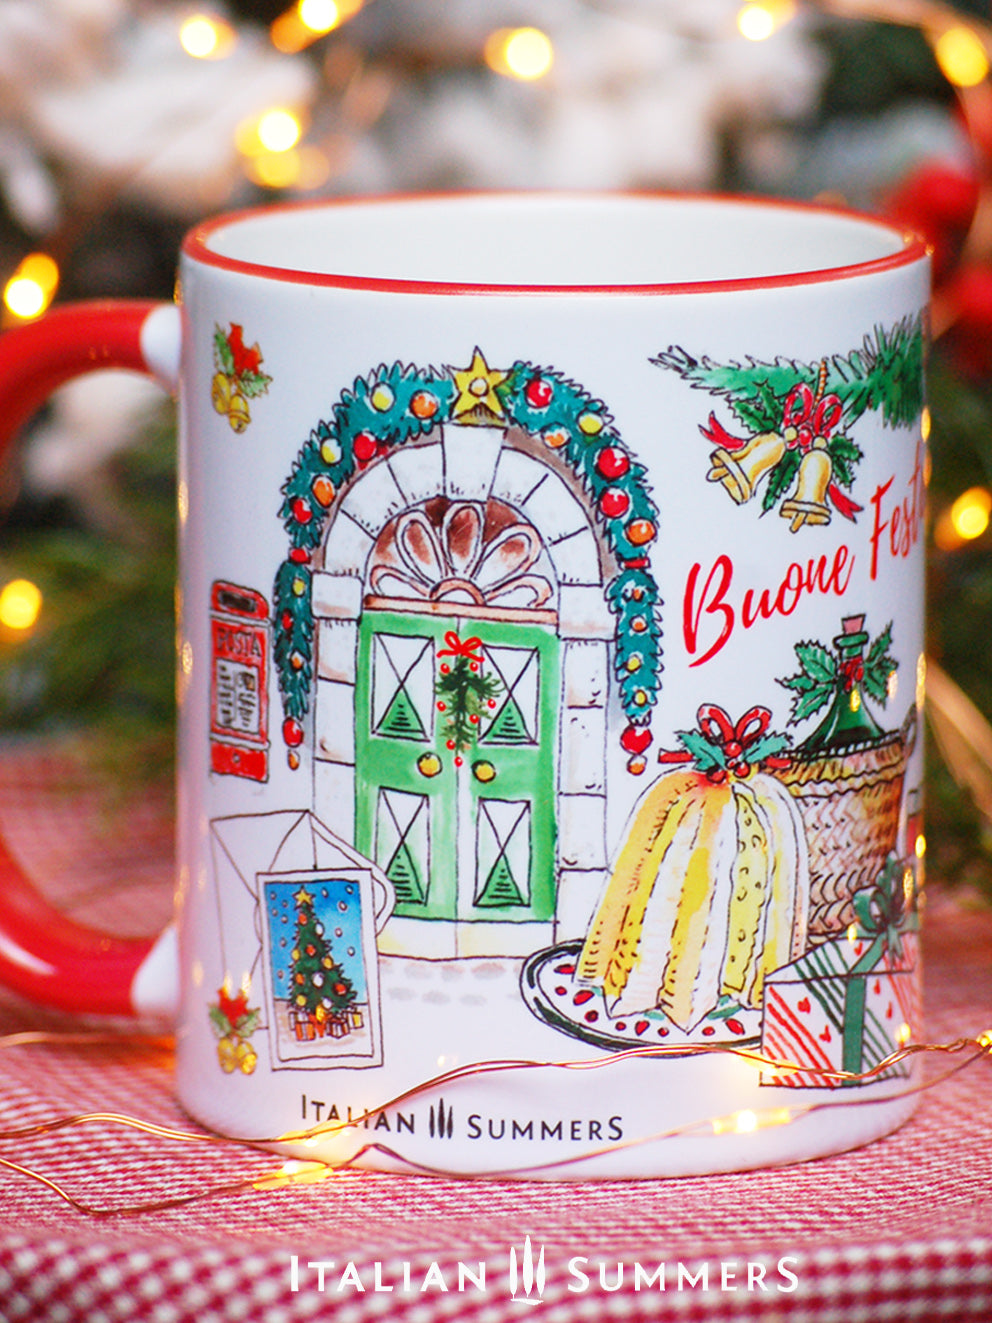 Italy Christmas mug With a charming Italian-inspired design featuring all the traditional trimmings of an Italian Christmas, it'll have you singing "Santa Lucia" in no time! Plus, the quote on the mug reads "Buon Natale in Italy means a Merry Christmas to you", making the perfect gift. Made by Italian Summers copyright by Italian Summers